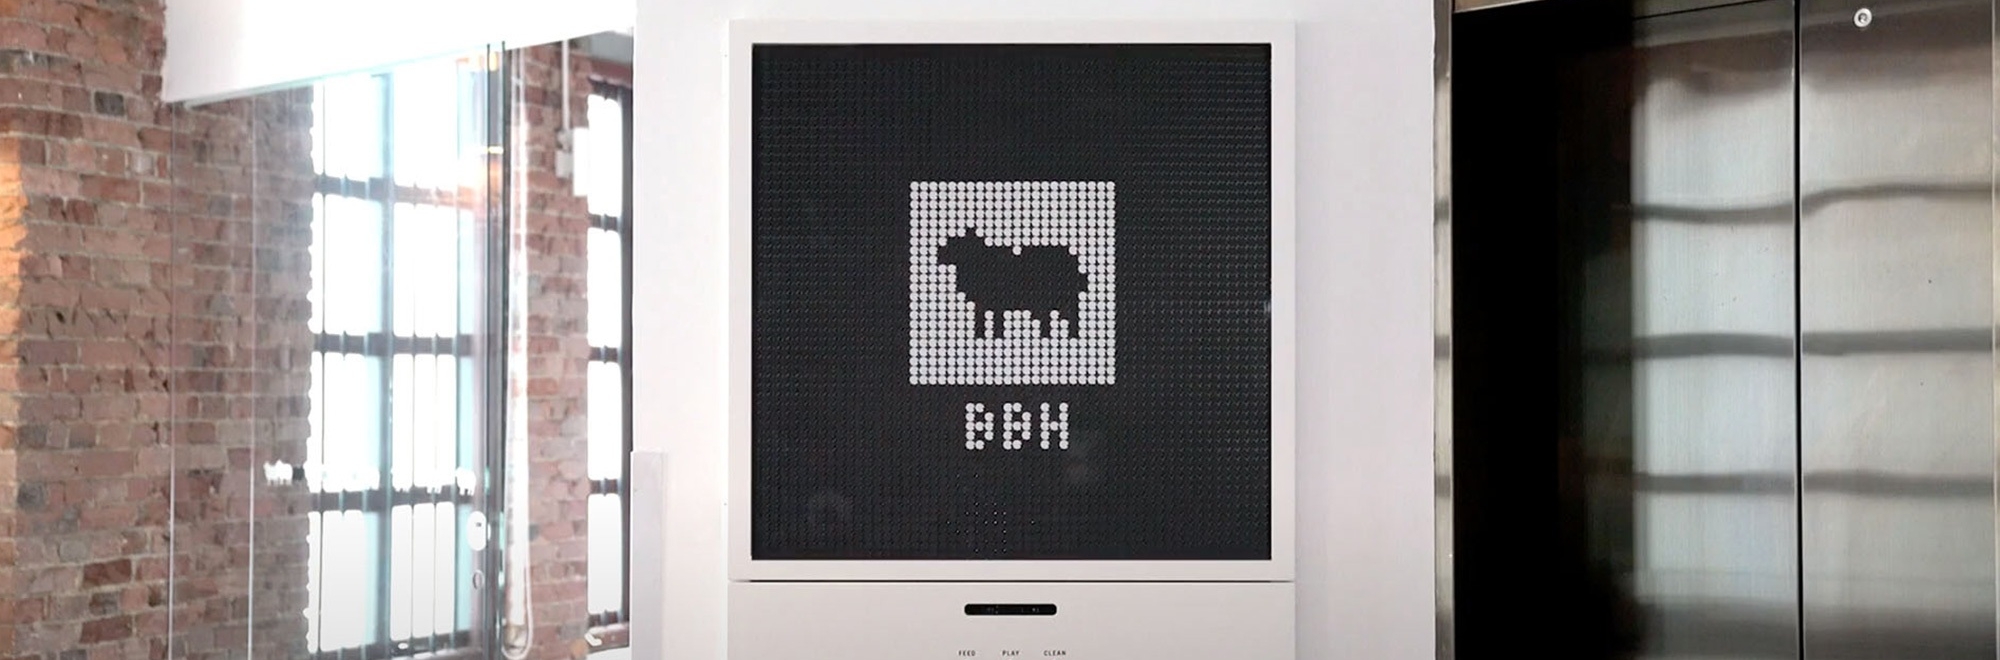 BBH Singapore welcomes back employees with a giant virtual office pet